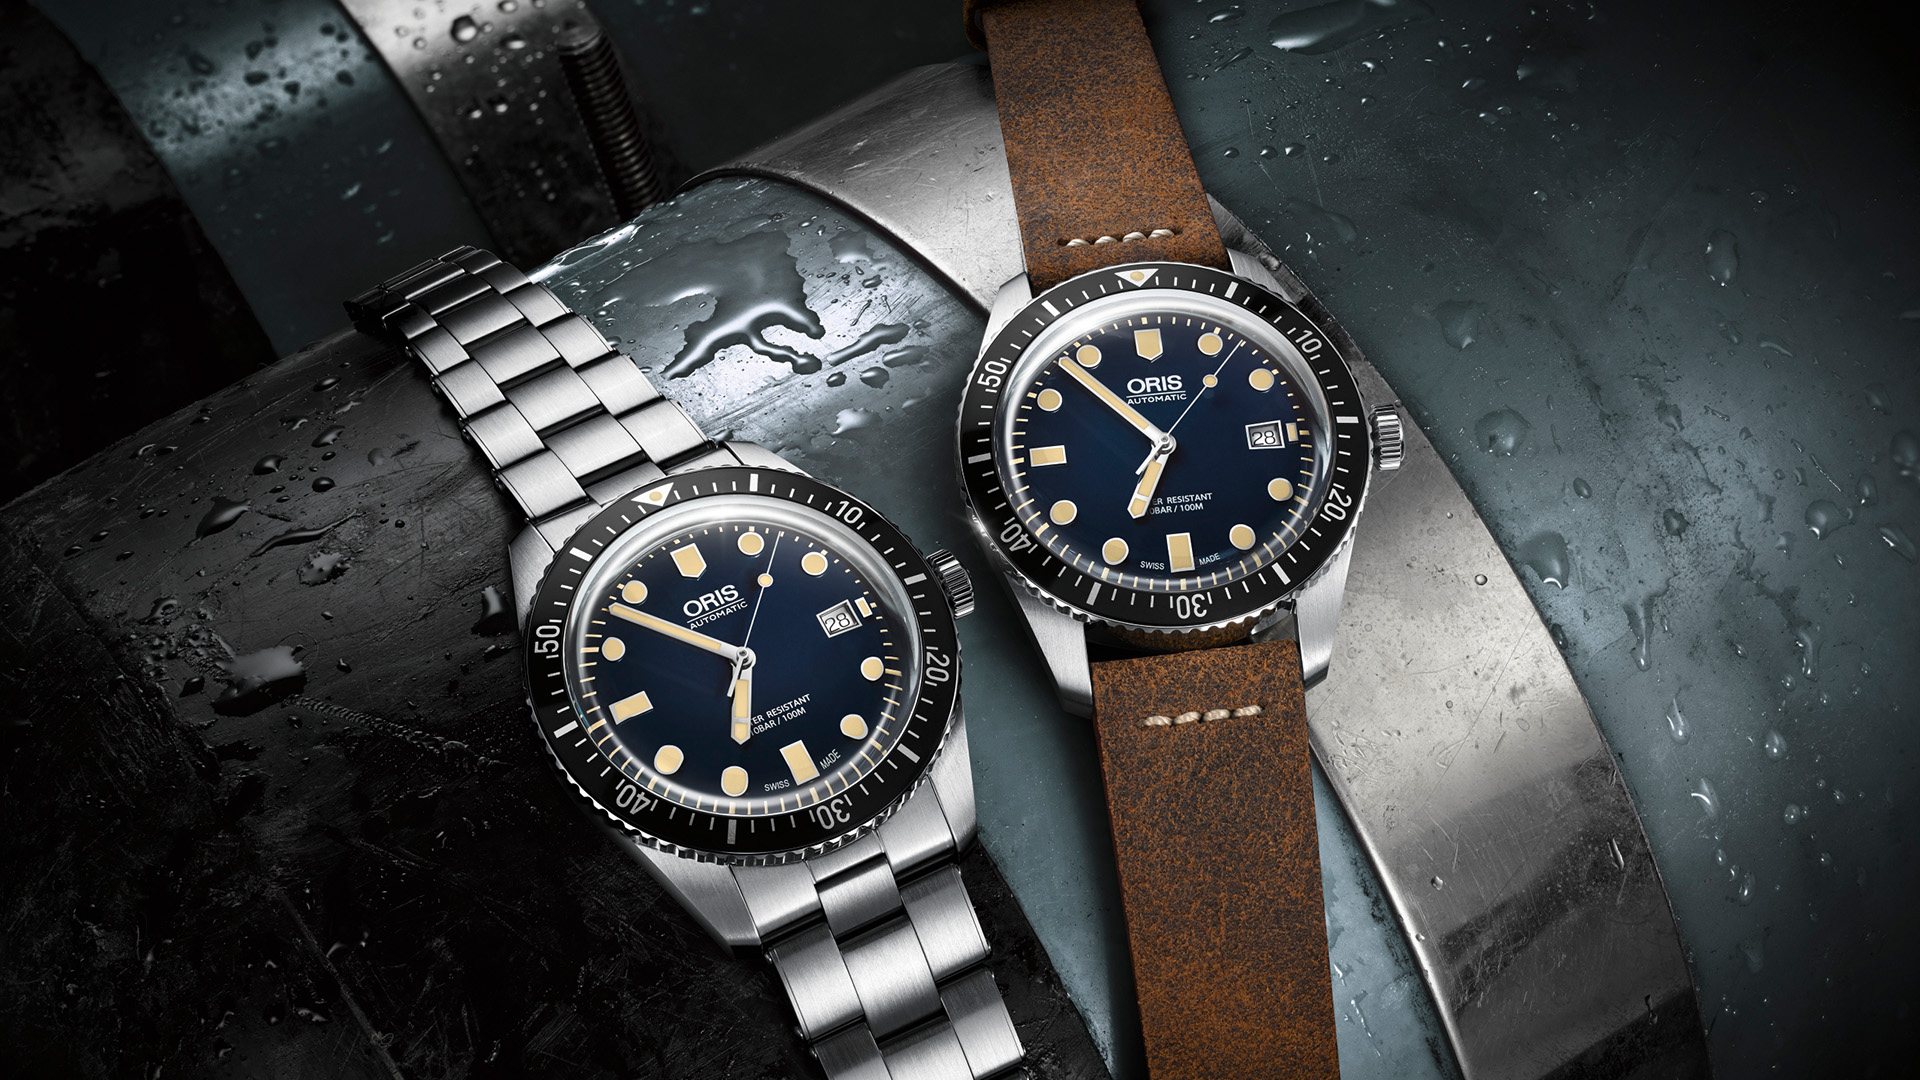 Divers Sixty-Five - Divers - Watches - 01 733 7720 4055-07 8 21 18 